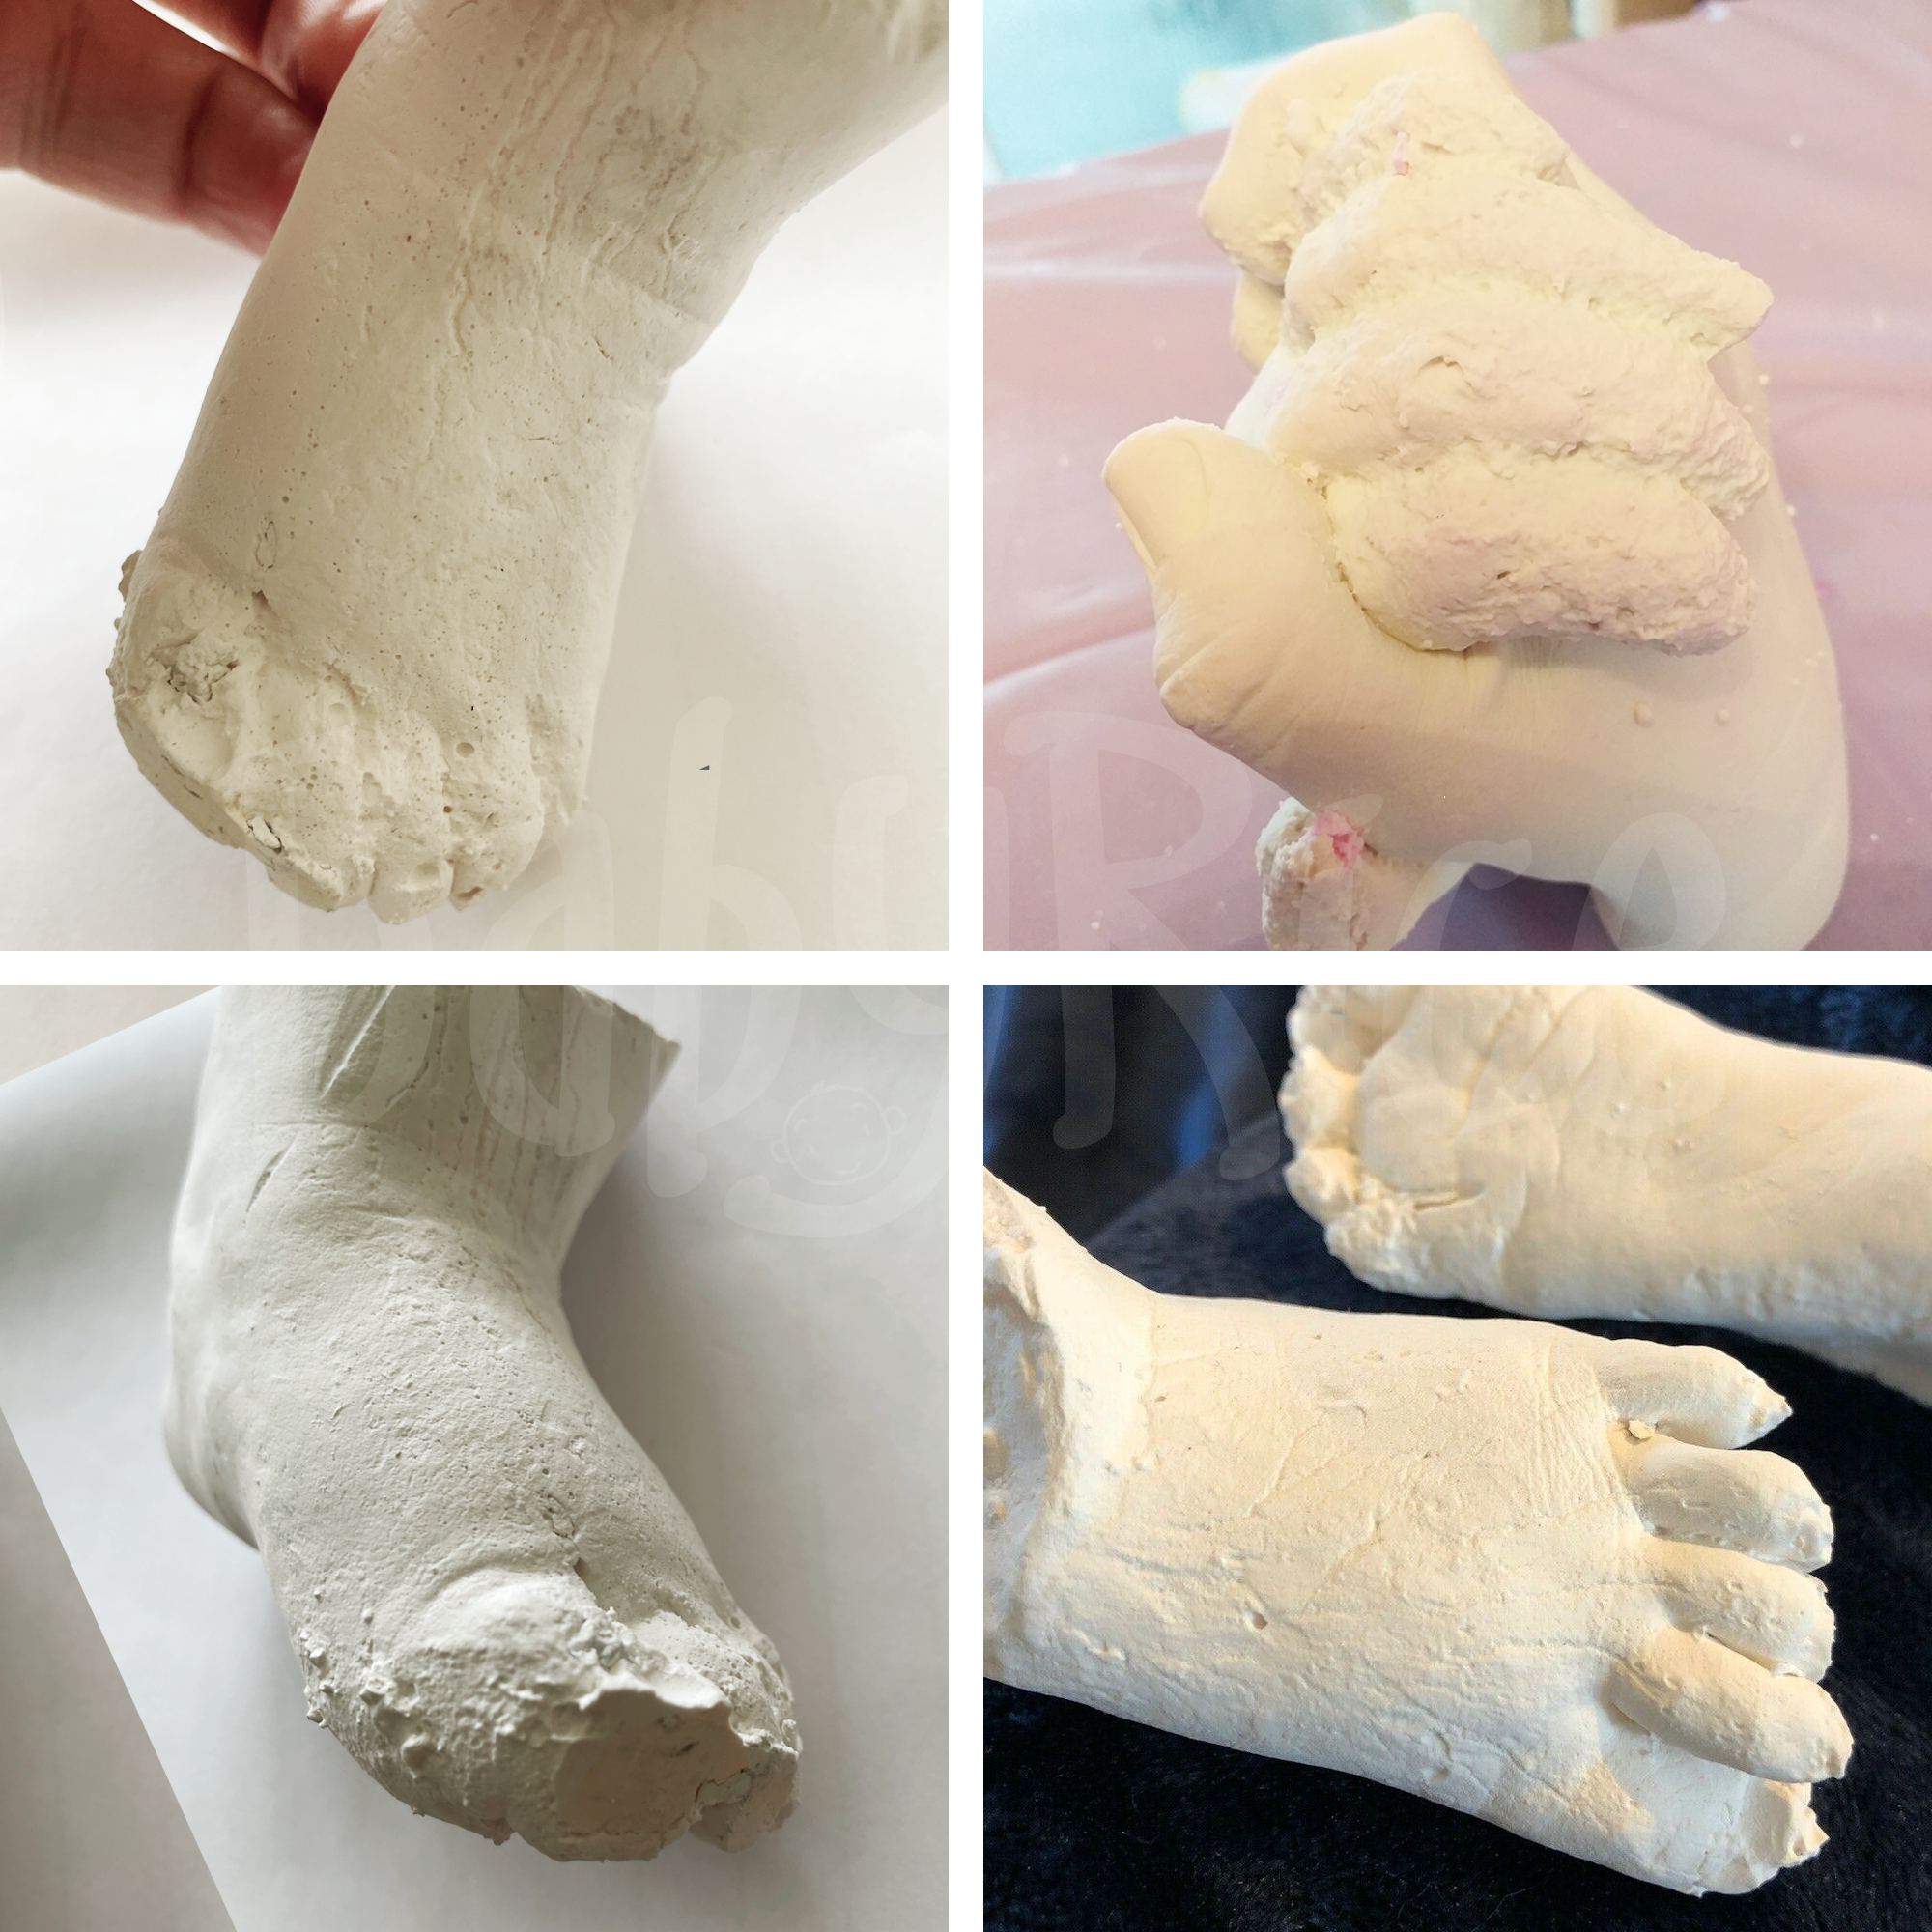 Movement in the alginate impression mould stops the alginate from replicating a perfect impression